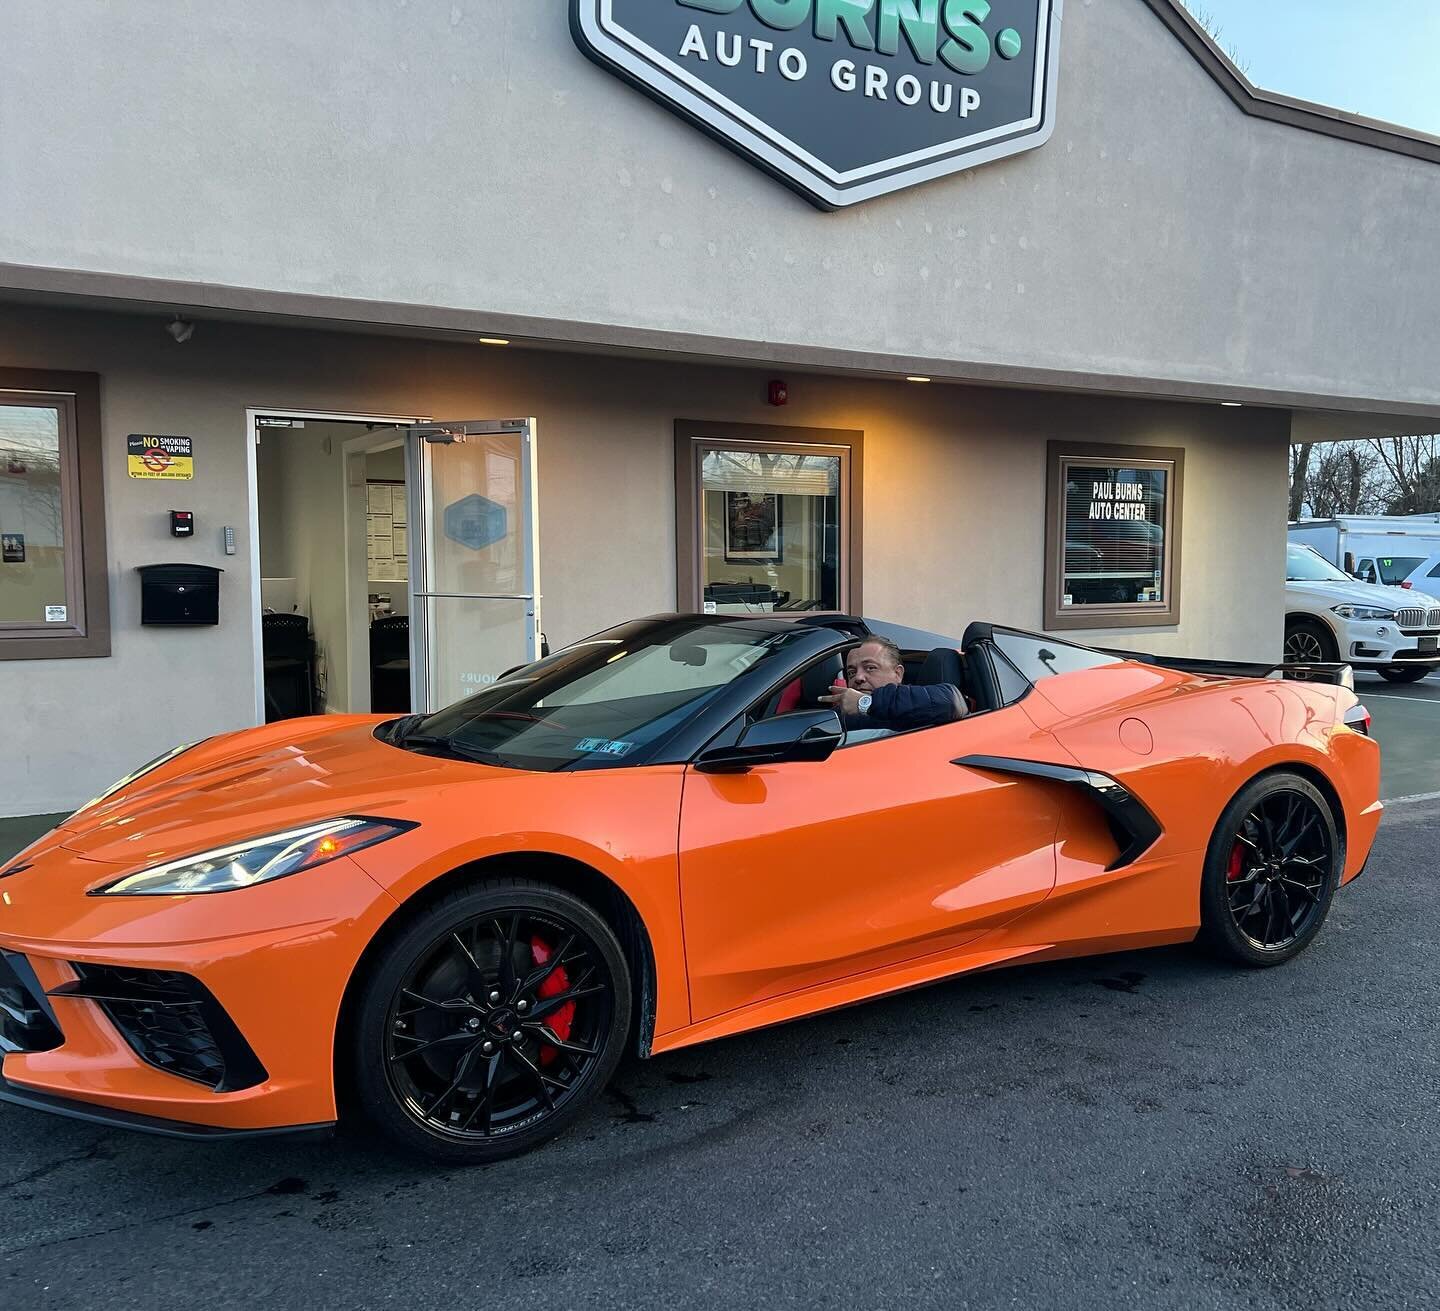 Congrats to Mikey from Staten Island on his 2023 Corvette 3LT. We appreciate you making the trip down. Lot of good stories from this guy. Enjoy the ride 🏎️